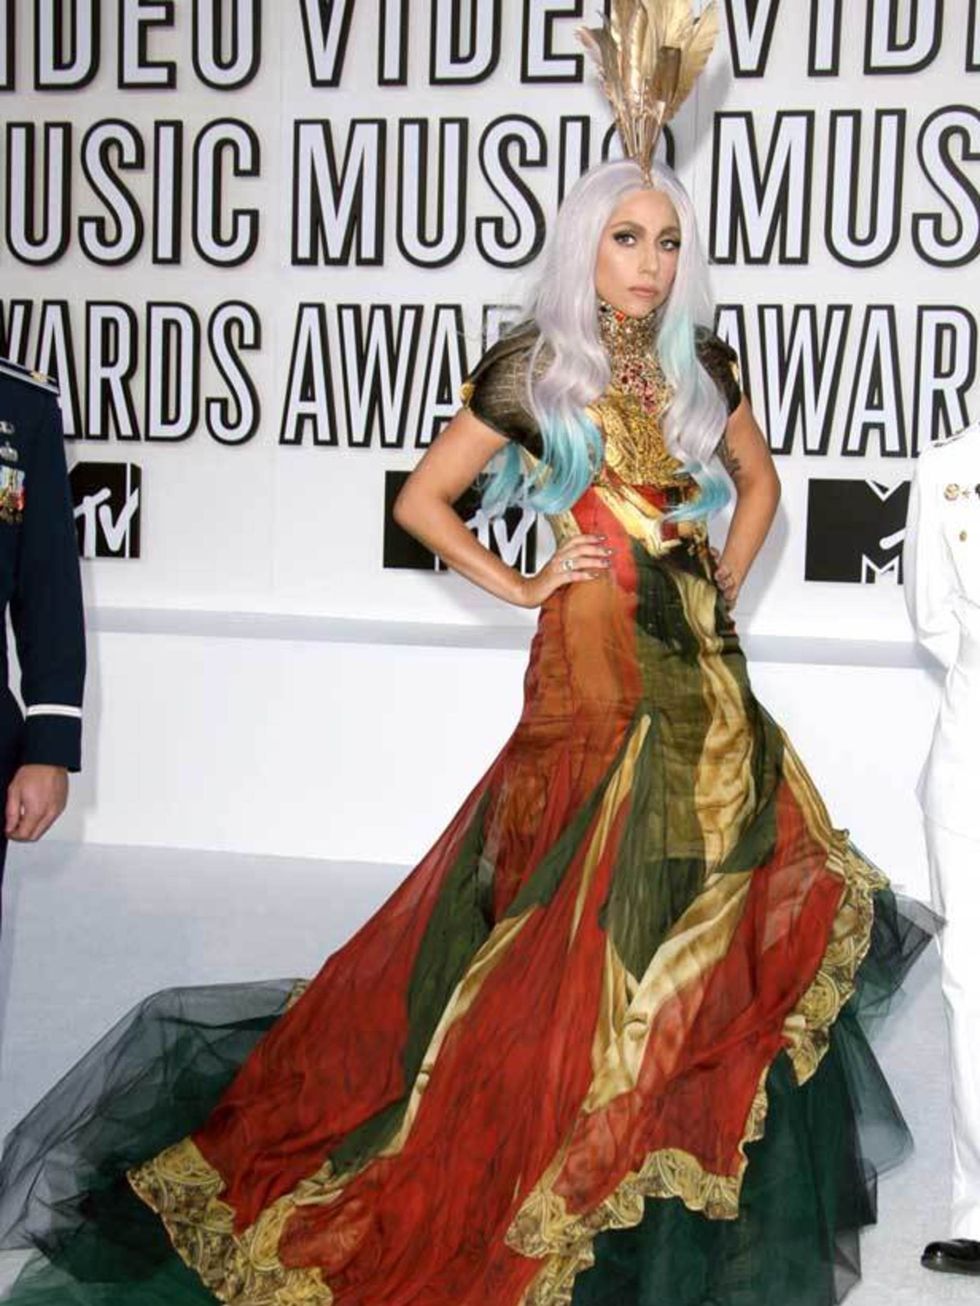 <p><a href="http://www.elleuk.com/starstyle/style-files/%28section%29/lady-gaga">Lady Gaga</a> wearing <a href="http://www.elleuk.com/catwalk/collections/alexander-mcqueen">Alexander McQueen</a> at the VMAs, 2010</p>